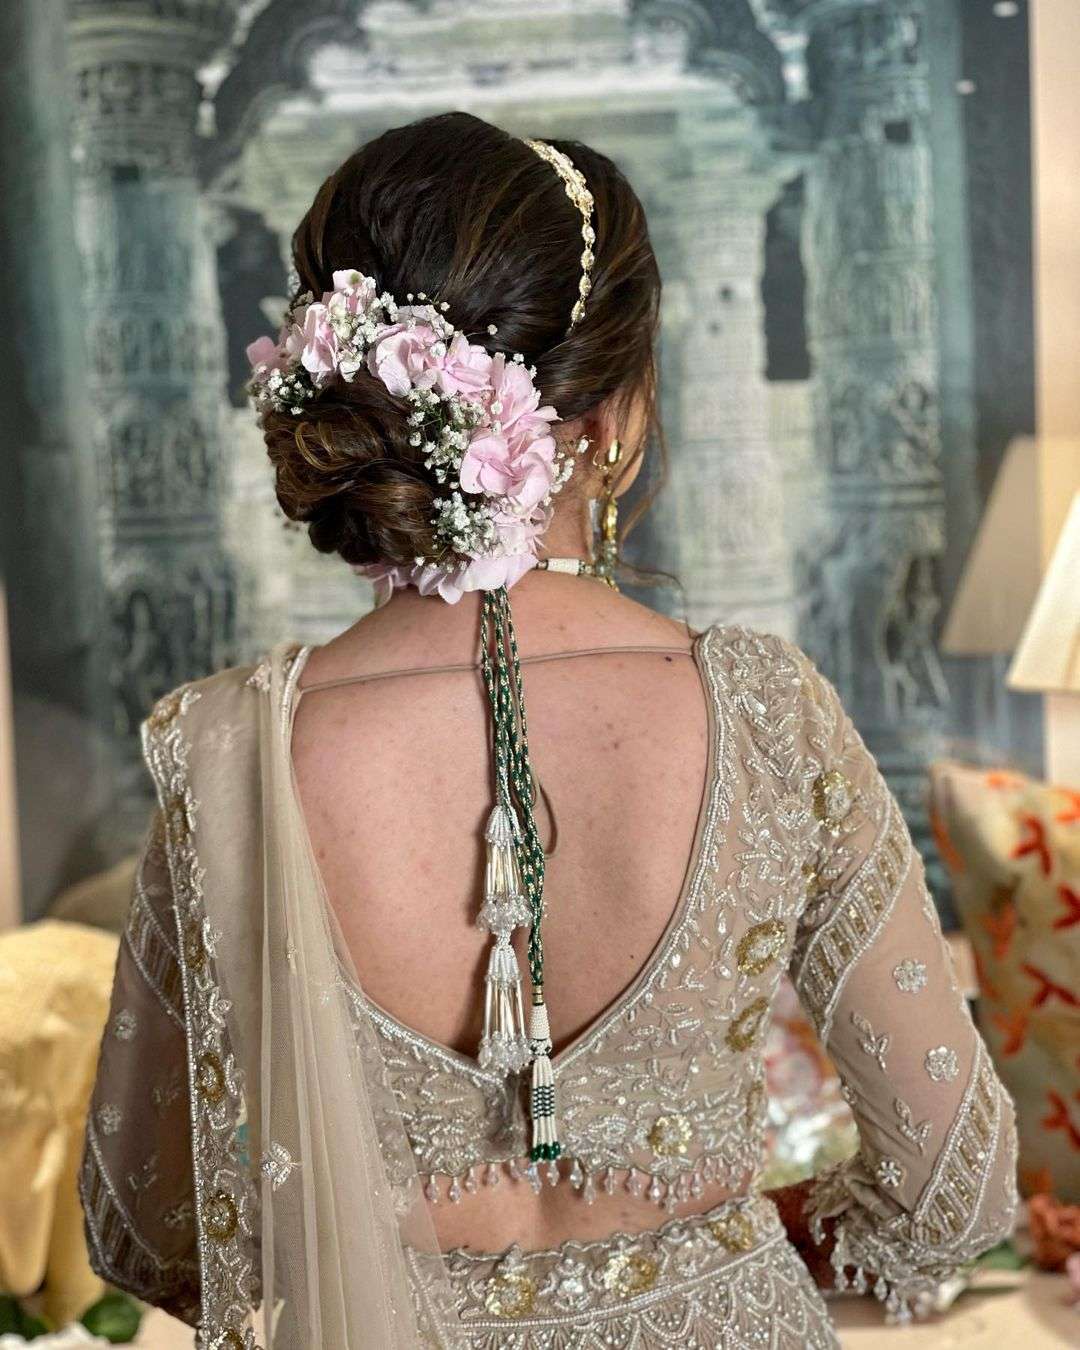 𝓤𝓷𝔀𝓻𝓲𝓽𝓽𝓮𝓷 𝓓𝓮𝓼𝓽𝓲𝓷𝔂 ✓ | Bride hairstyles, Reception hairstyles,  Engagement hairstyles